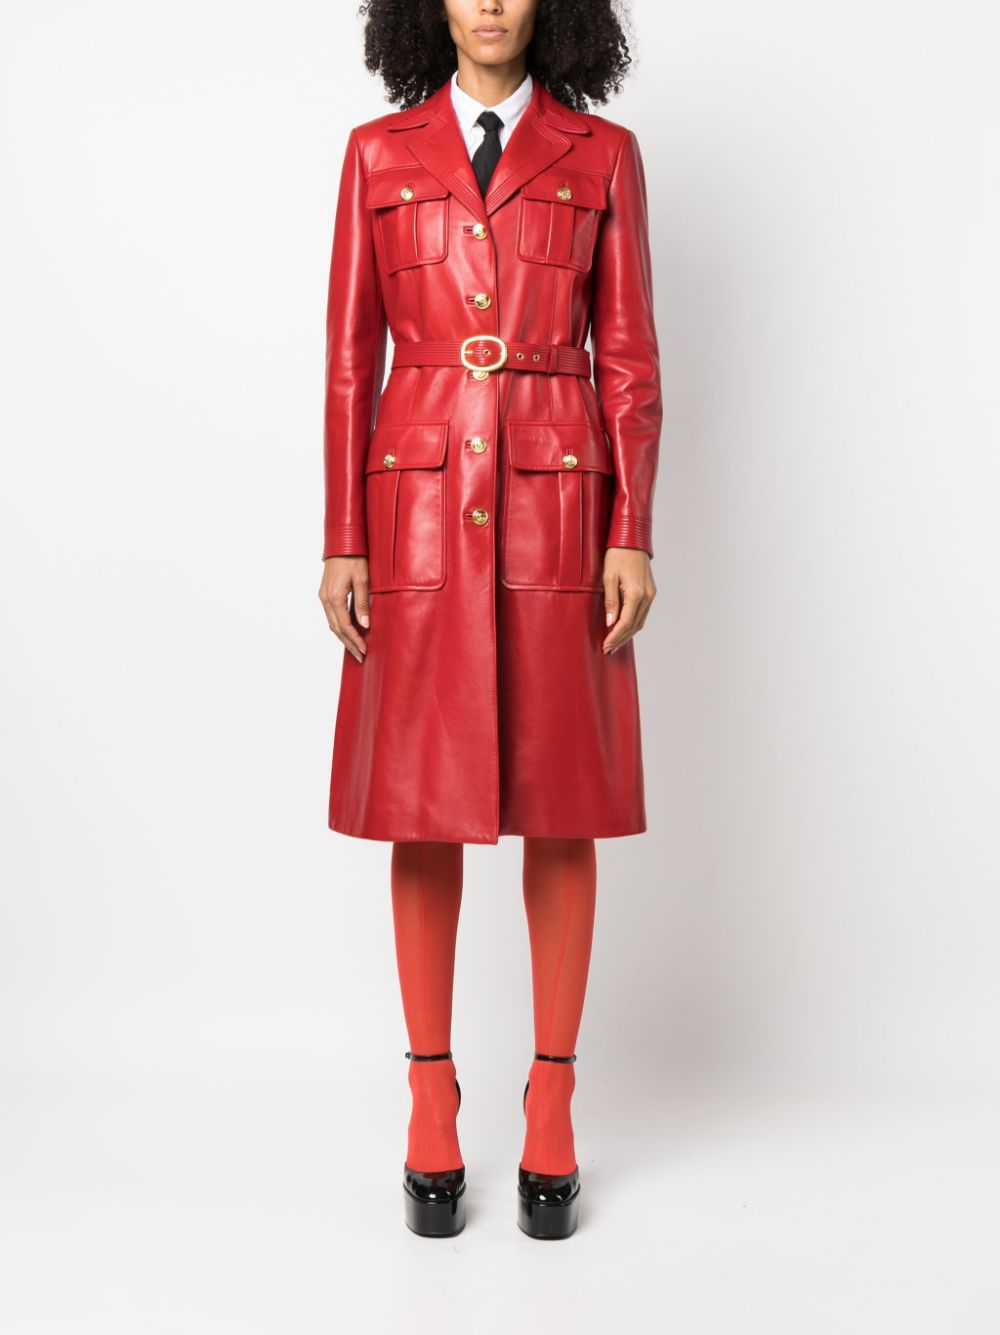 Gucci Belted Leather Trench Coat - Farfetch